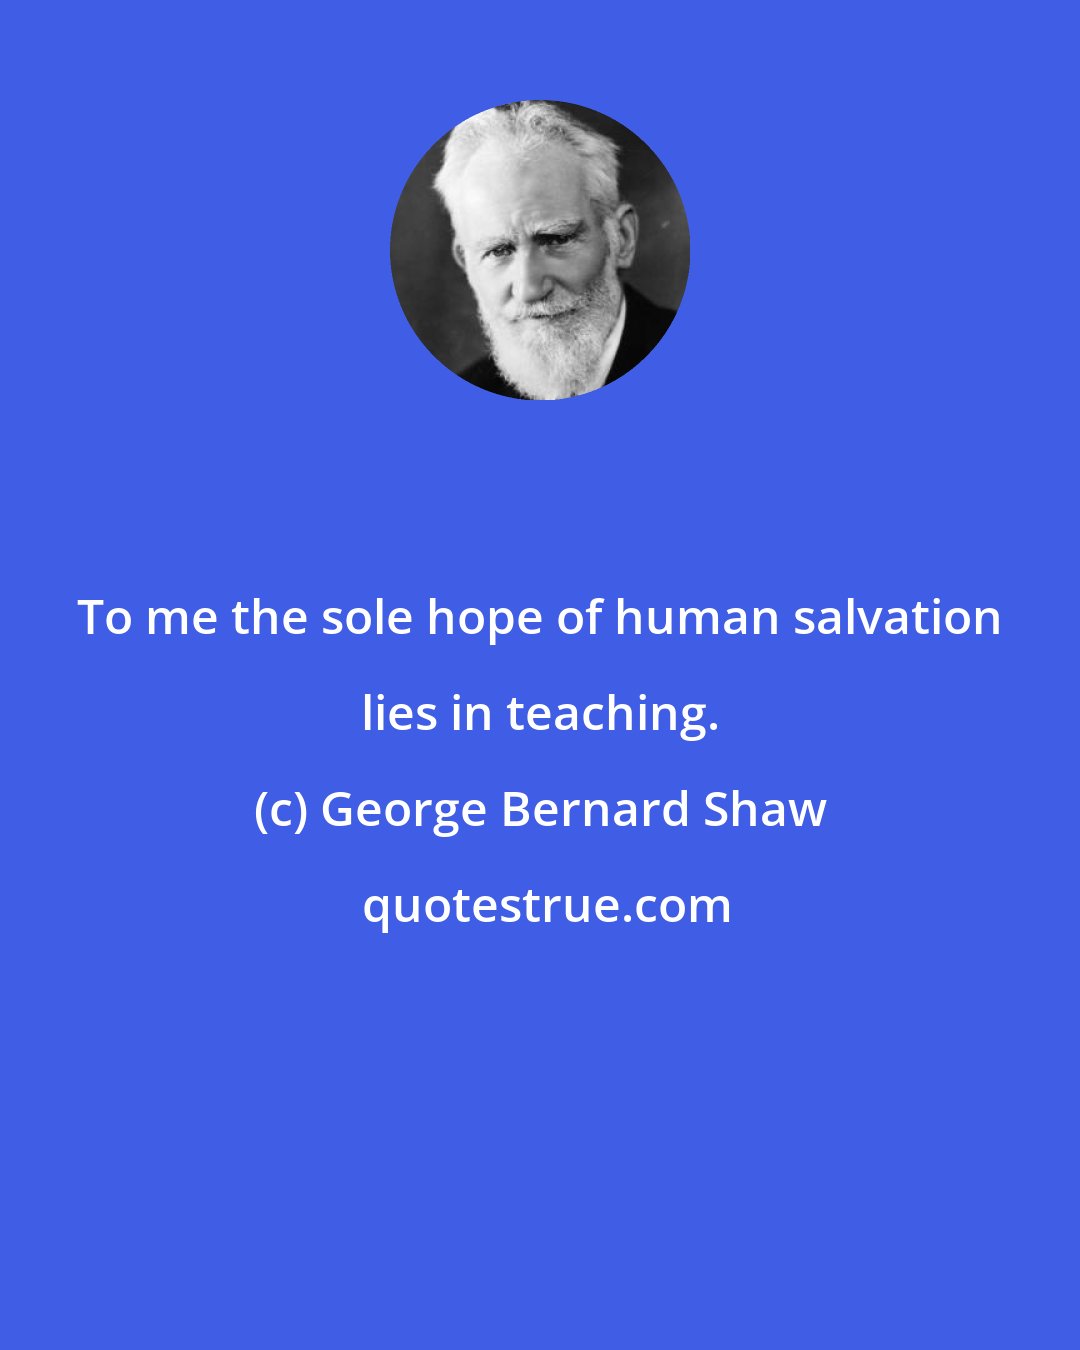 George Bernard Shaw: To me the sole hope of human salvation lies in teaching.